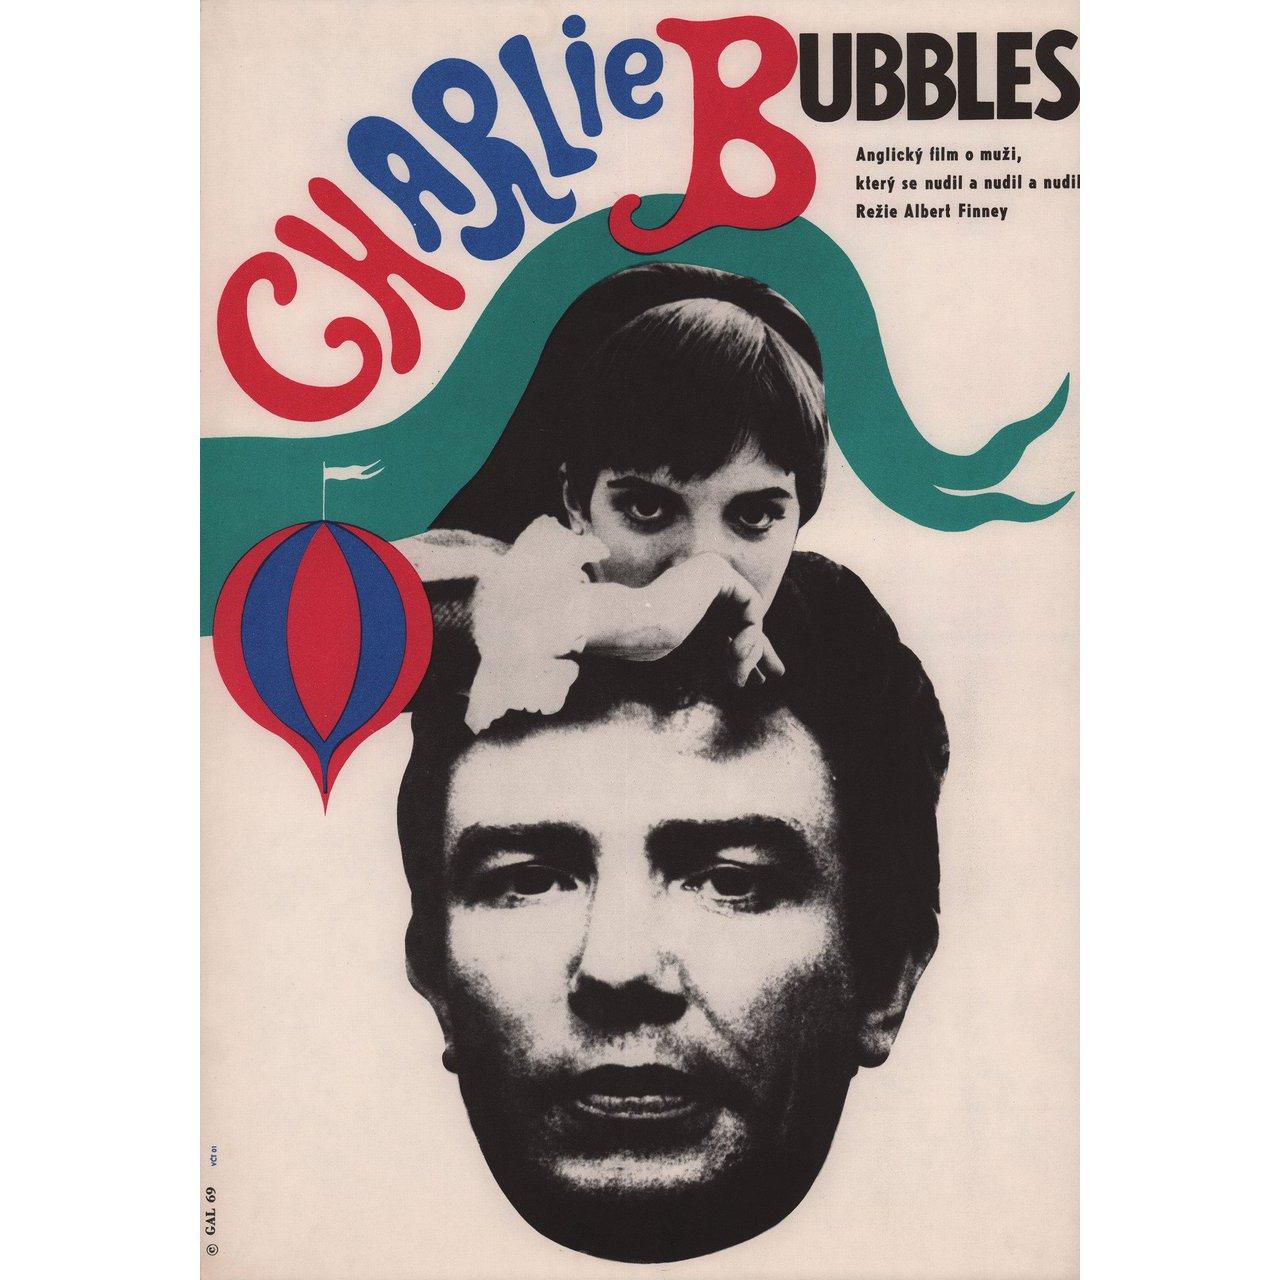 Original 1969 Czech A3 poster by Jaromir Gal for the film Charlie Bubbles directed by Albert Finney with Albert Finney / Colin Blakely / Billie Whitelaw / Liza Minnelli. Fine condition, rolled. Please note: the size is stated in inches and the